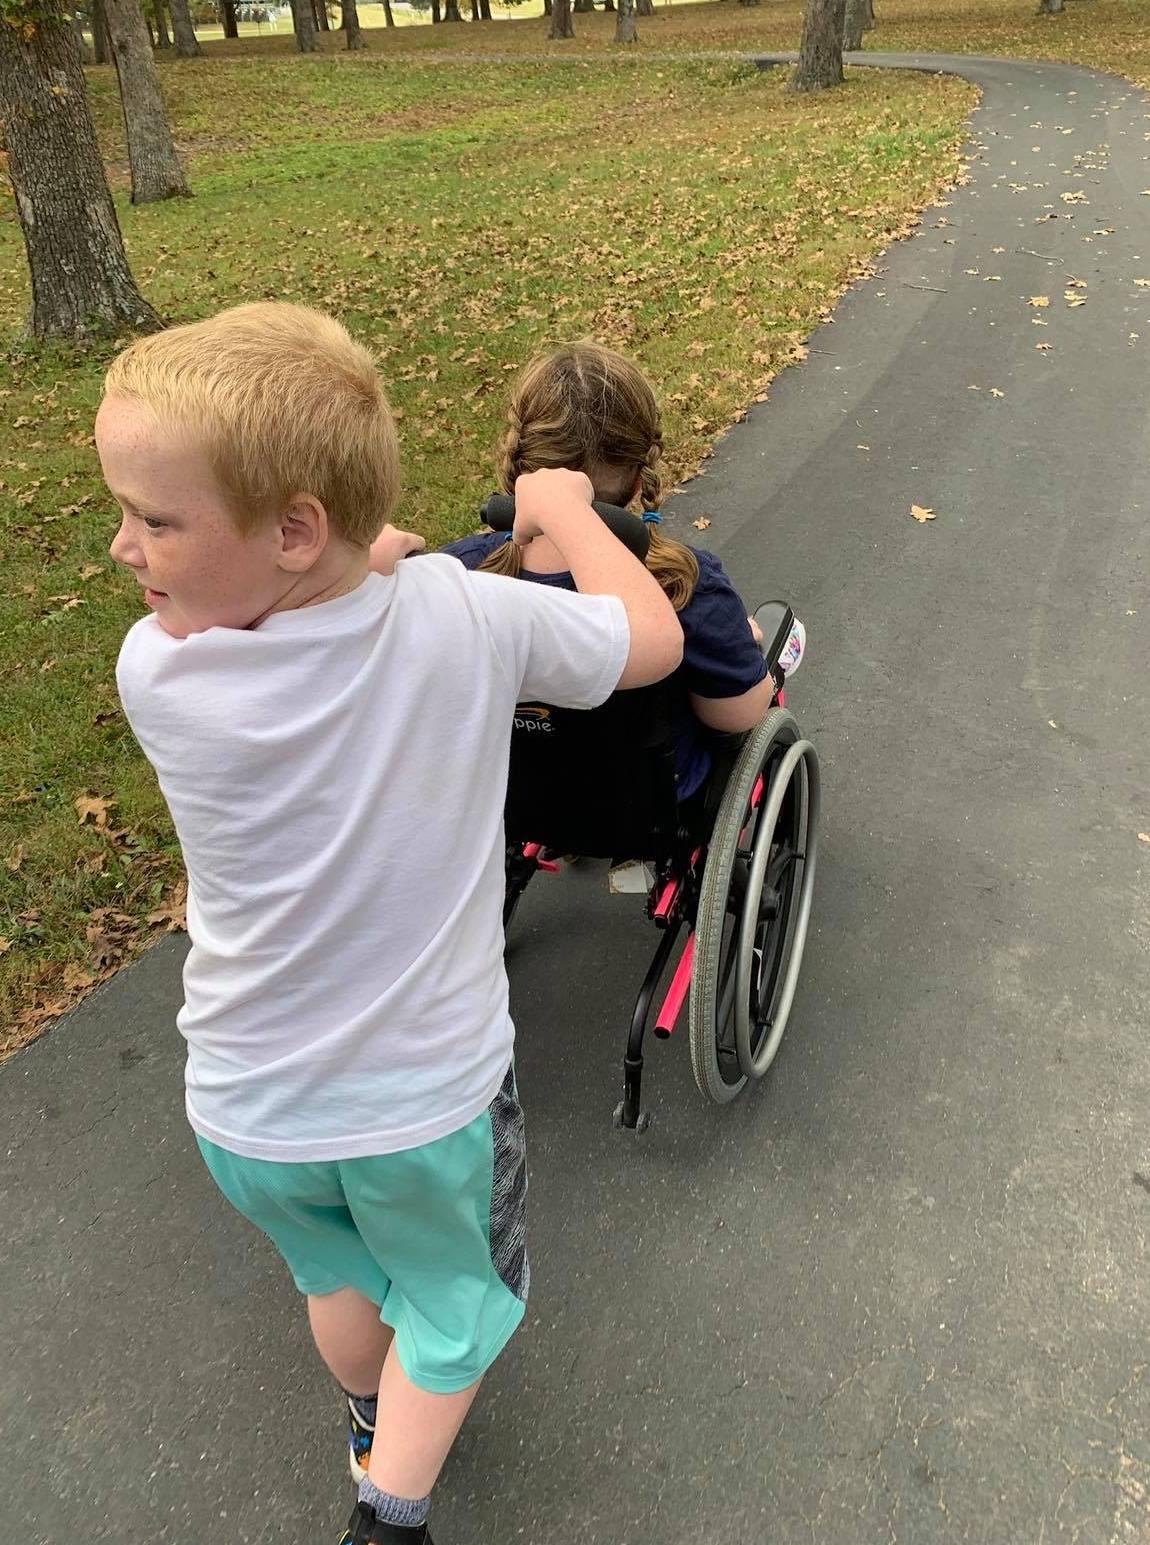 Jesse with Claire in a wheelchair. (Courtesy of <a href="https://www.facebook.com/shauna.starr.564">Shauna Starr</a>)